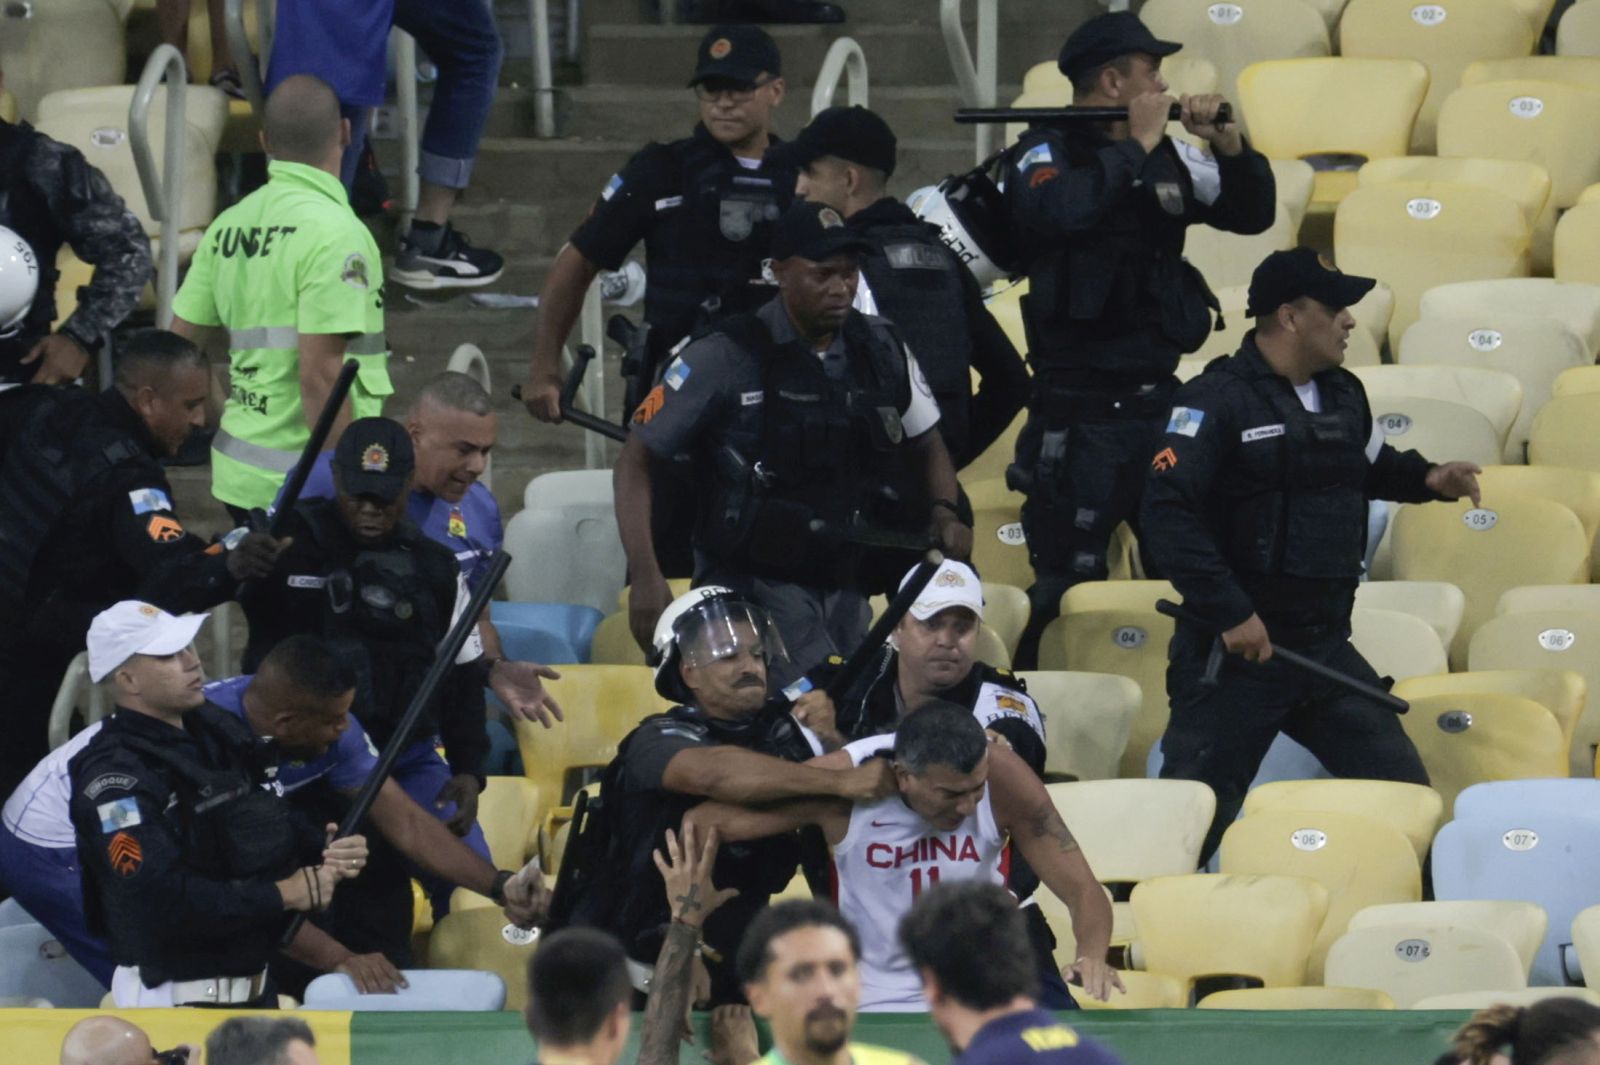 epa10988699 Members of Brazilian police try to control a clash between fans prior a FIFA 2026 World Cup qualifiers soccer match between Brazil and Argentina at Maracana stadium in Rio de Janeiro, Brazil, 21 November 2023.  EPA/Antonio Lacerda